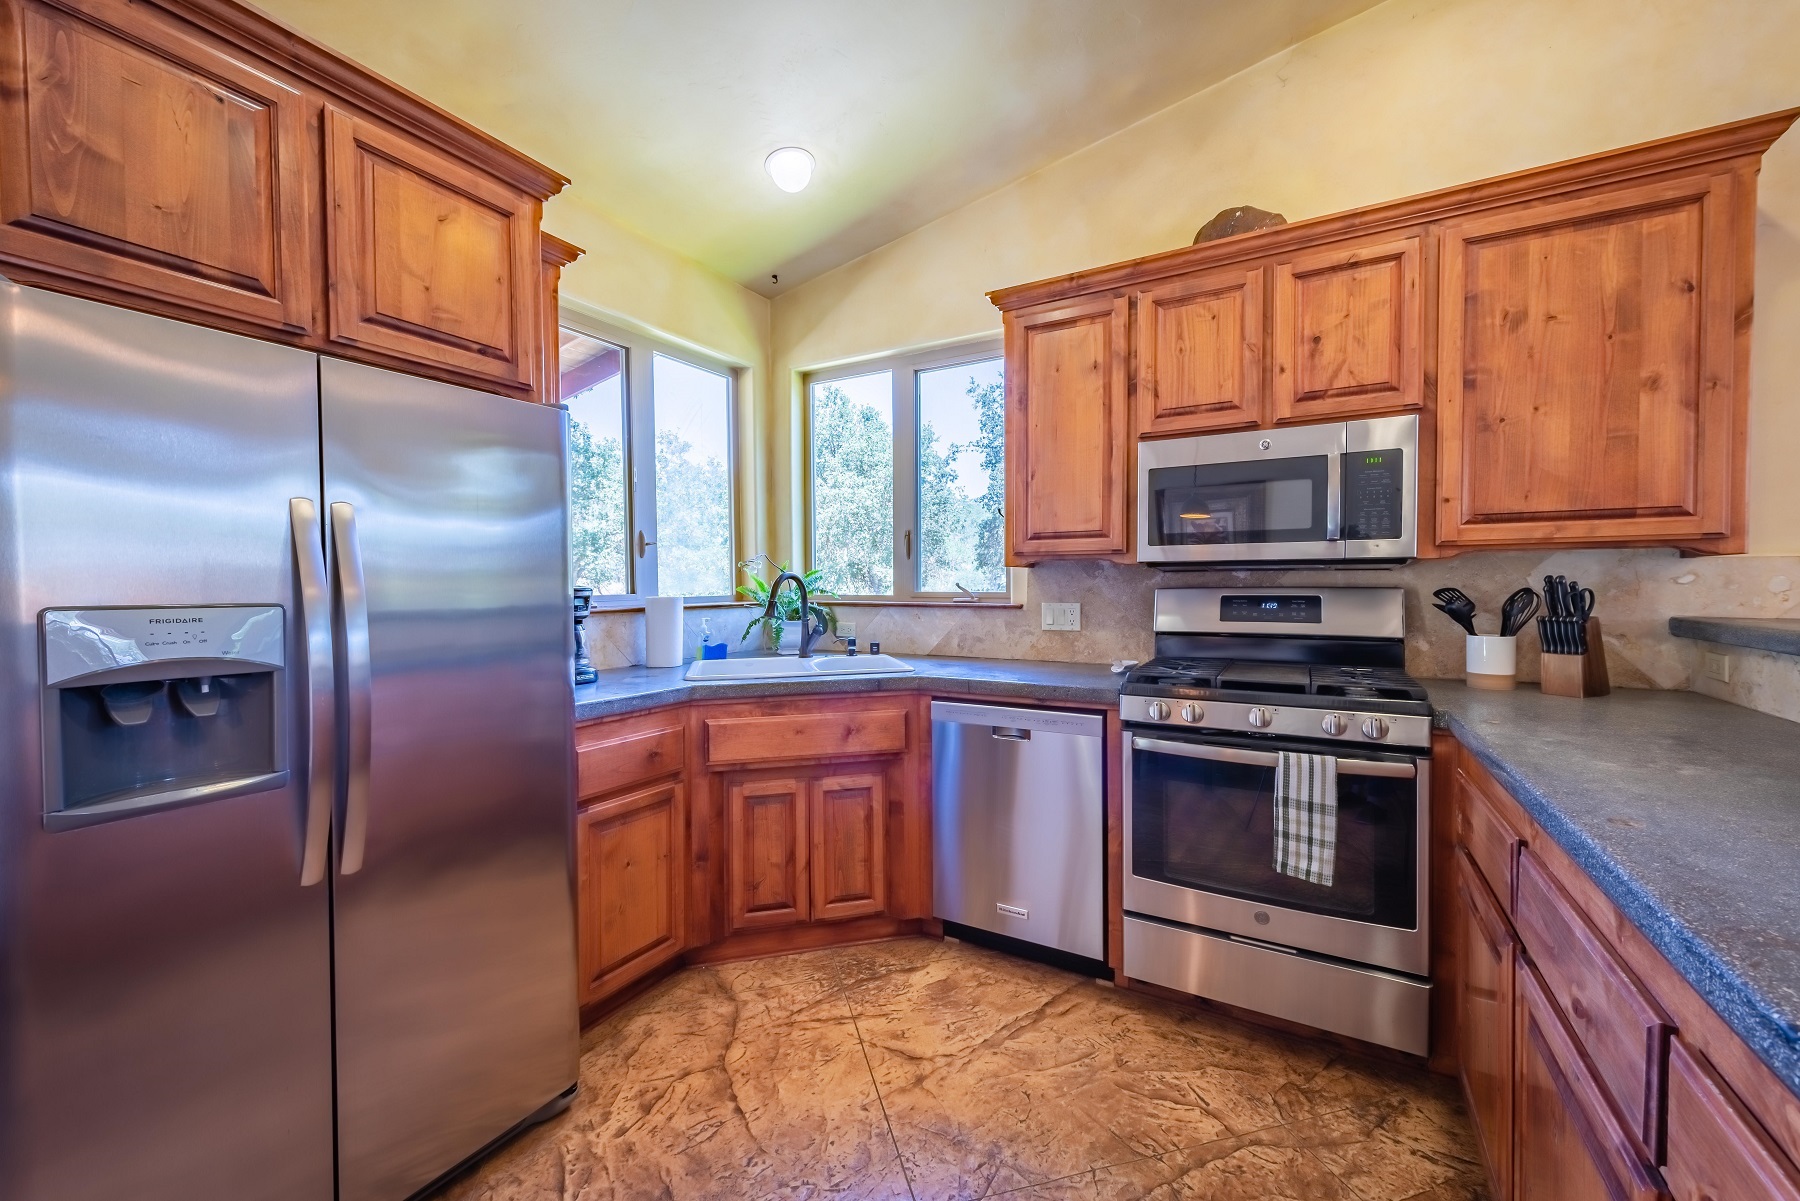 Stainless steel appliances and ample counter space for working.